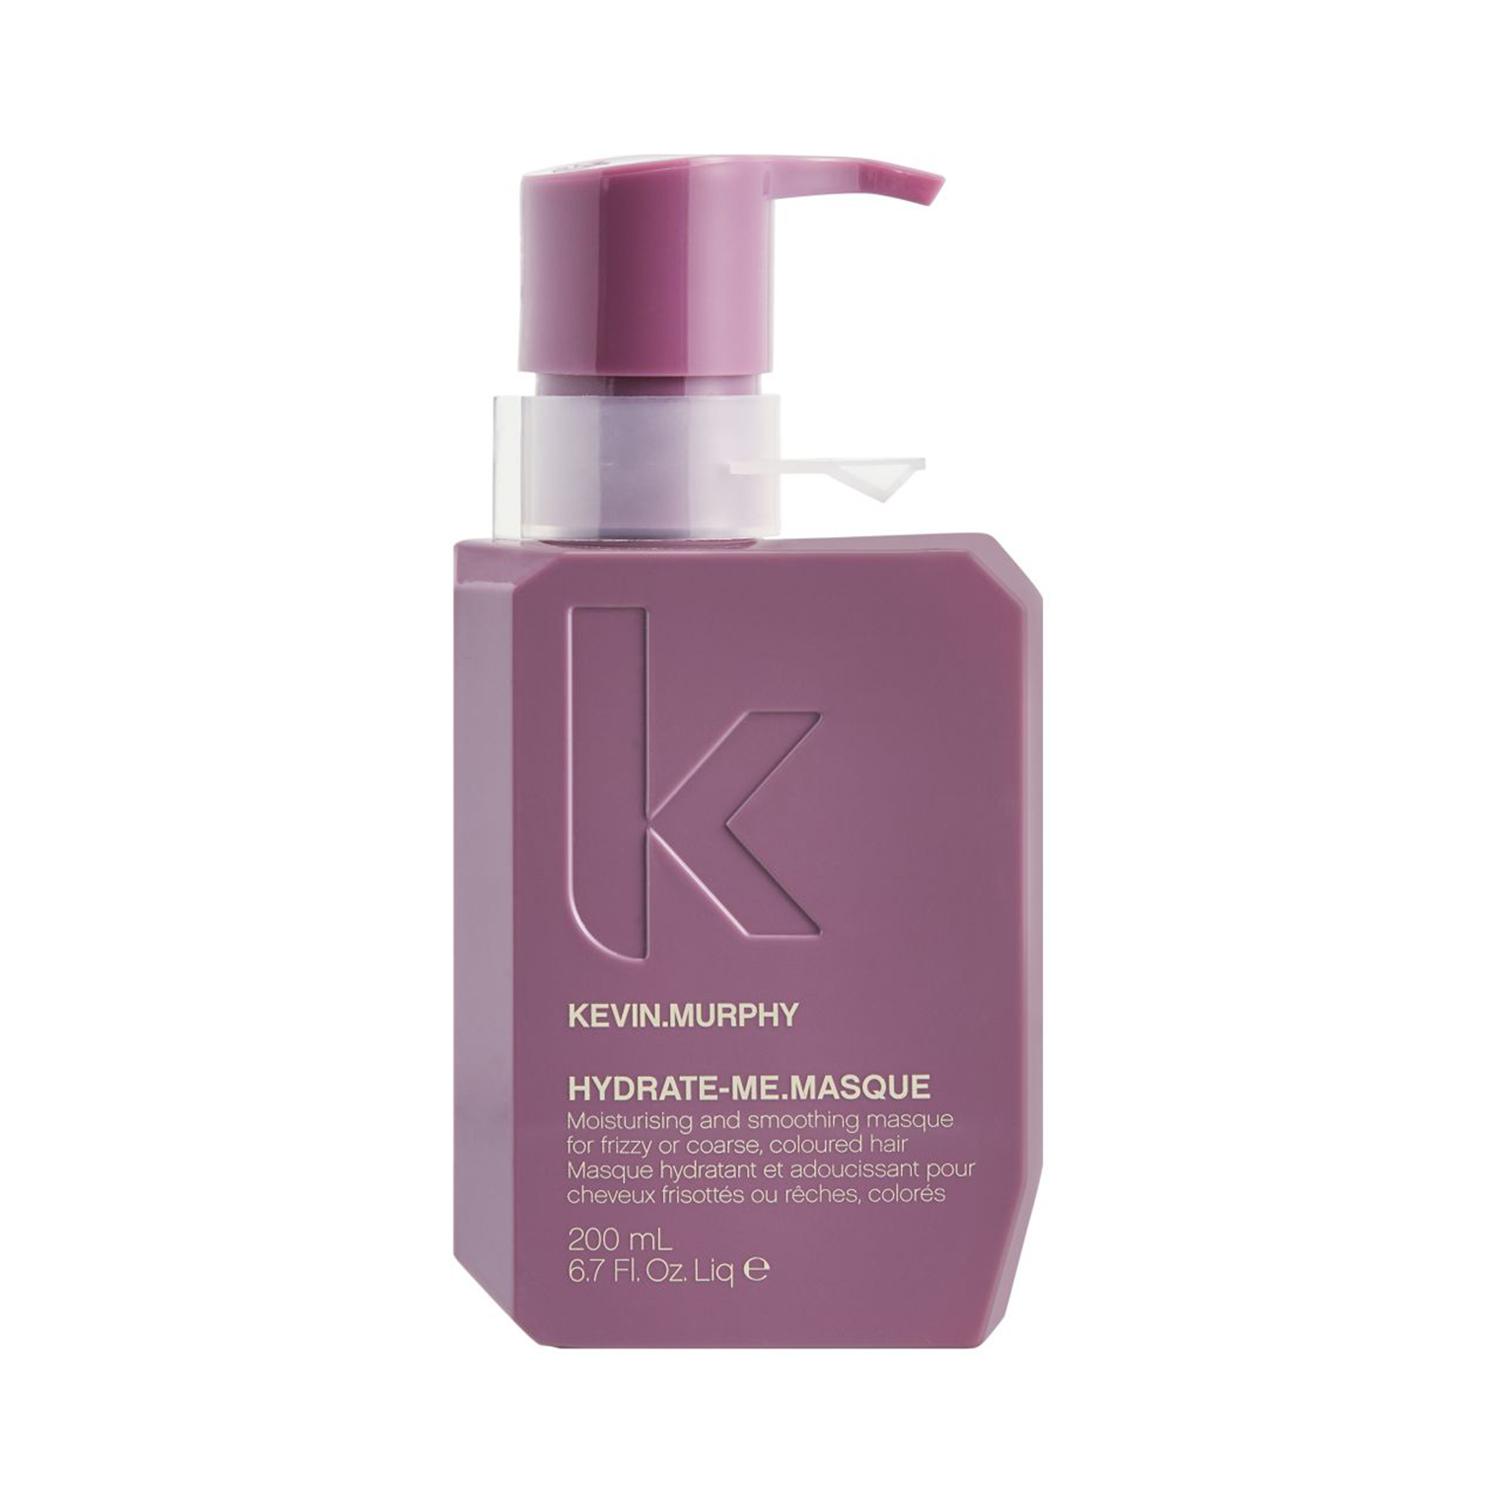 Kevin Murphy Hydrate-Me Masque Moisturizing And Smoothing Masque (200ml)